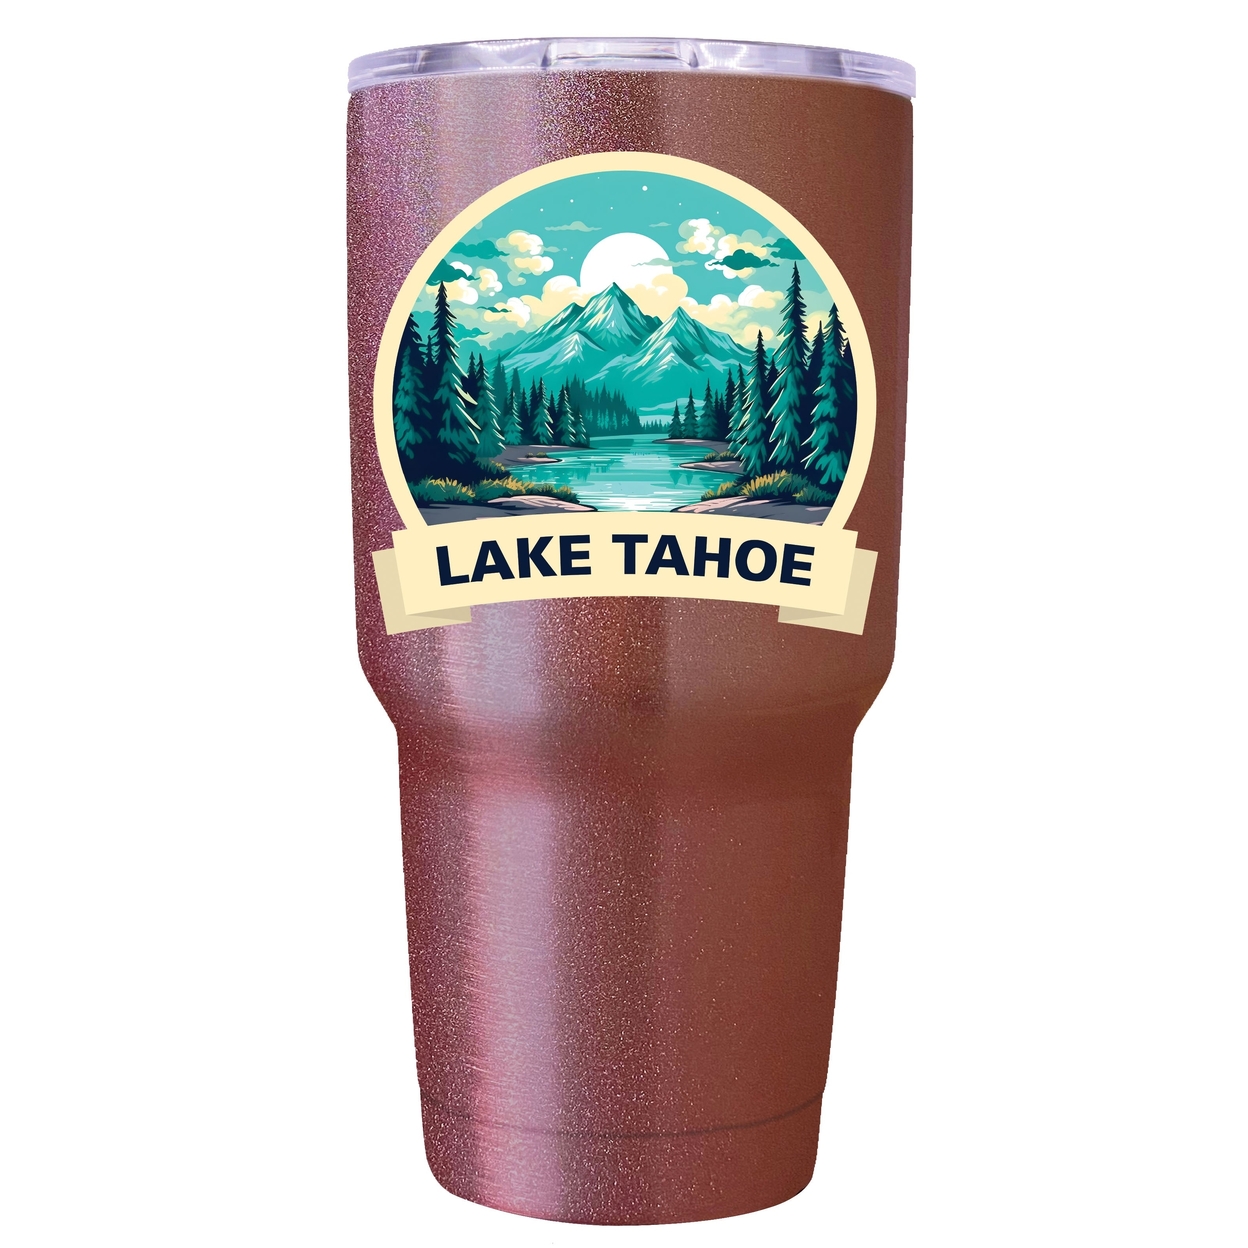 Lake Tahoe California Souvenir 24 Oz Insulated Stainless Steel Tumbler - Rose Gold,,2-Pack